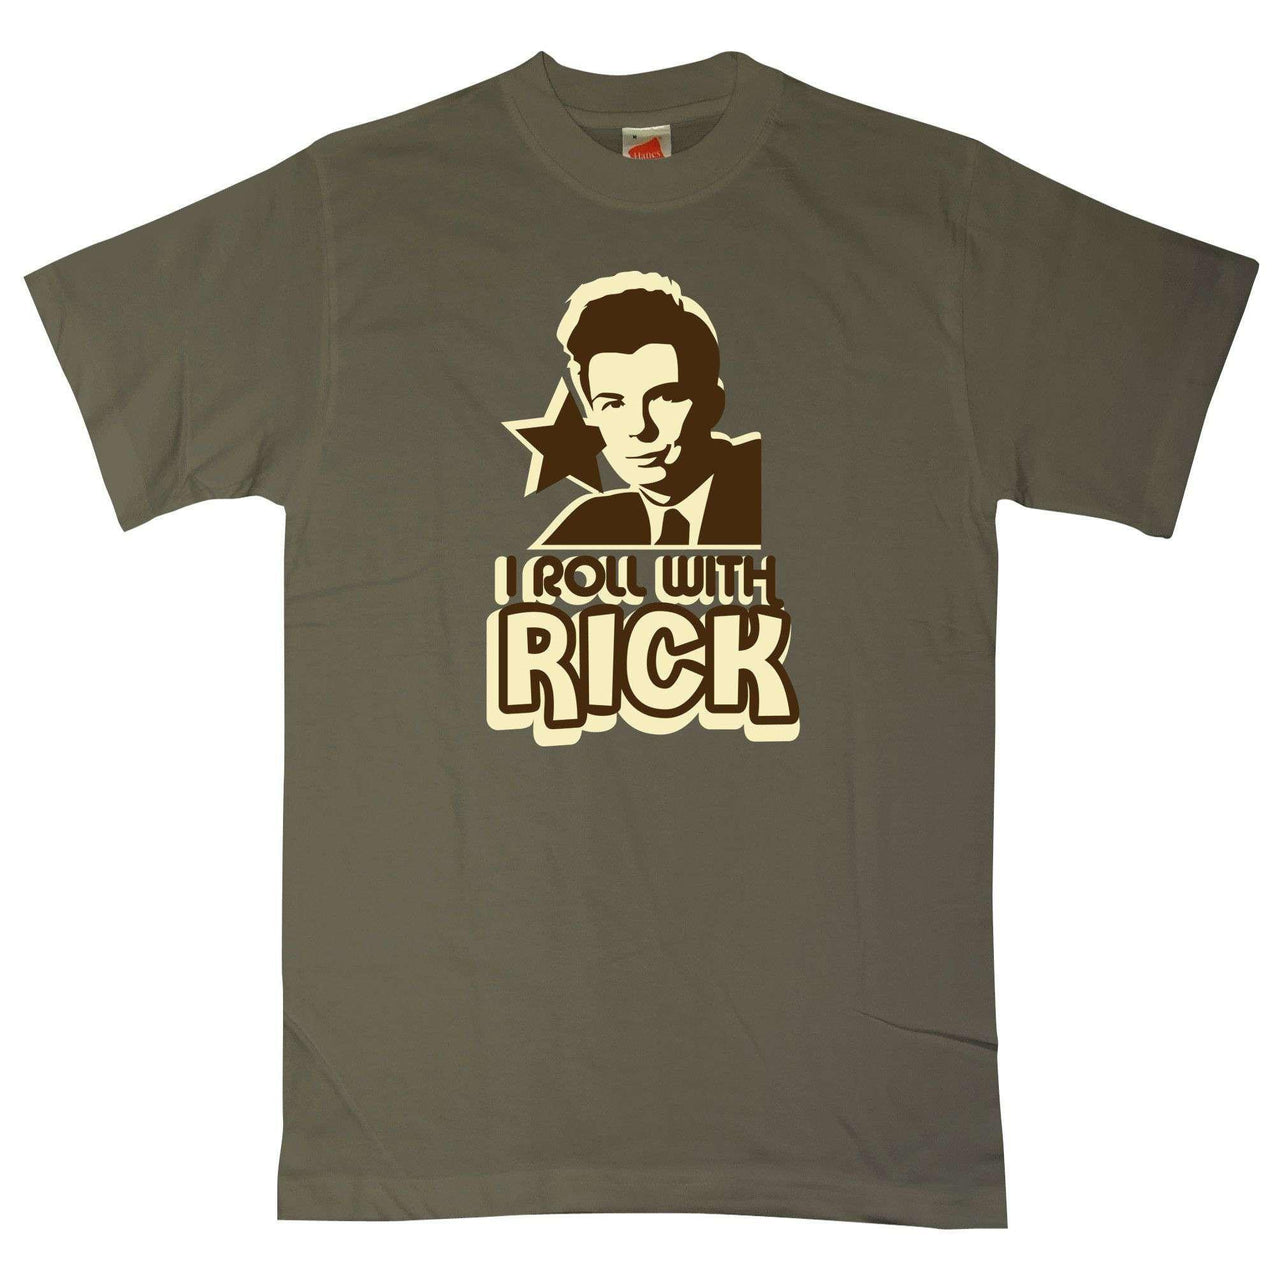 I Roll With Rick Unisex T-Shirt For Men And Women 8Ball